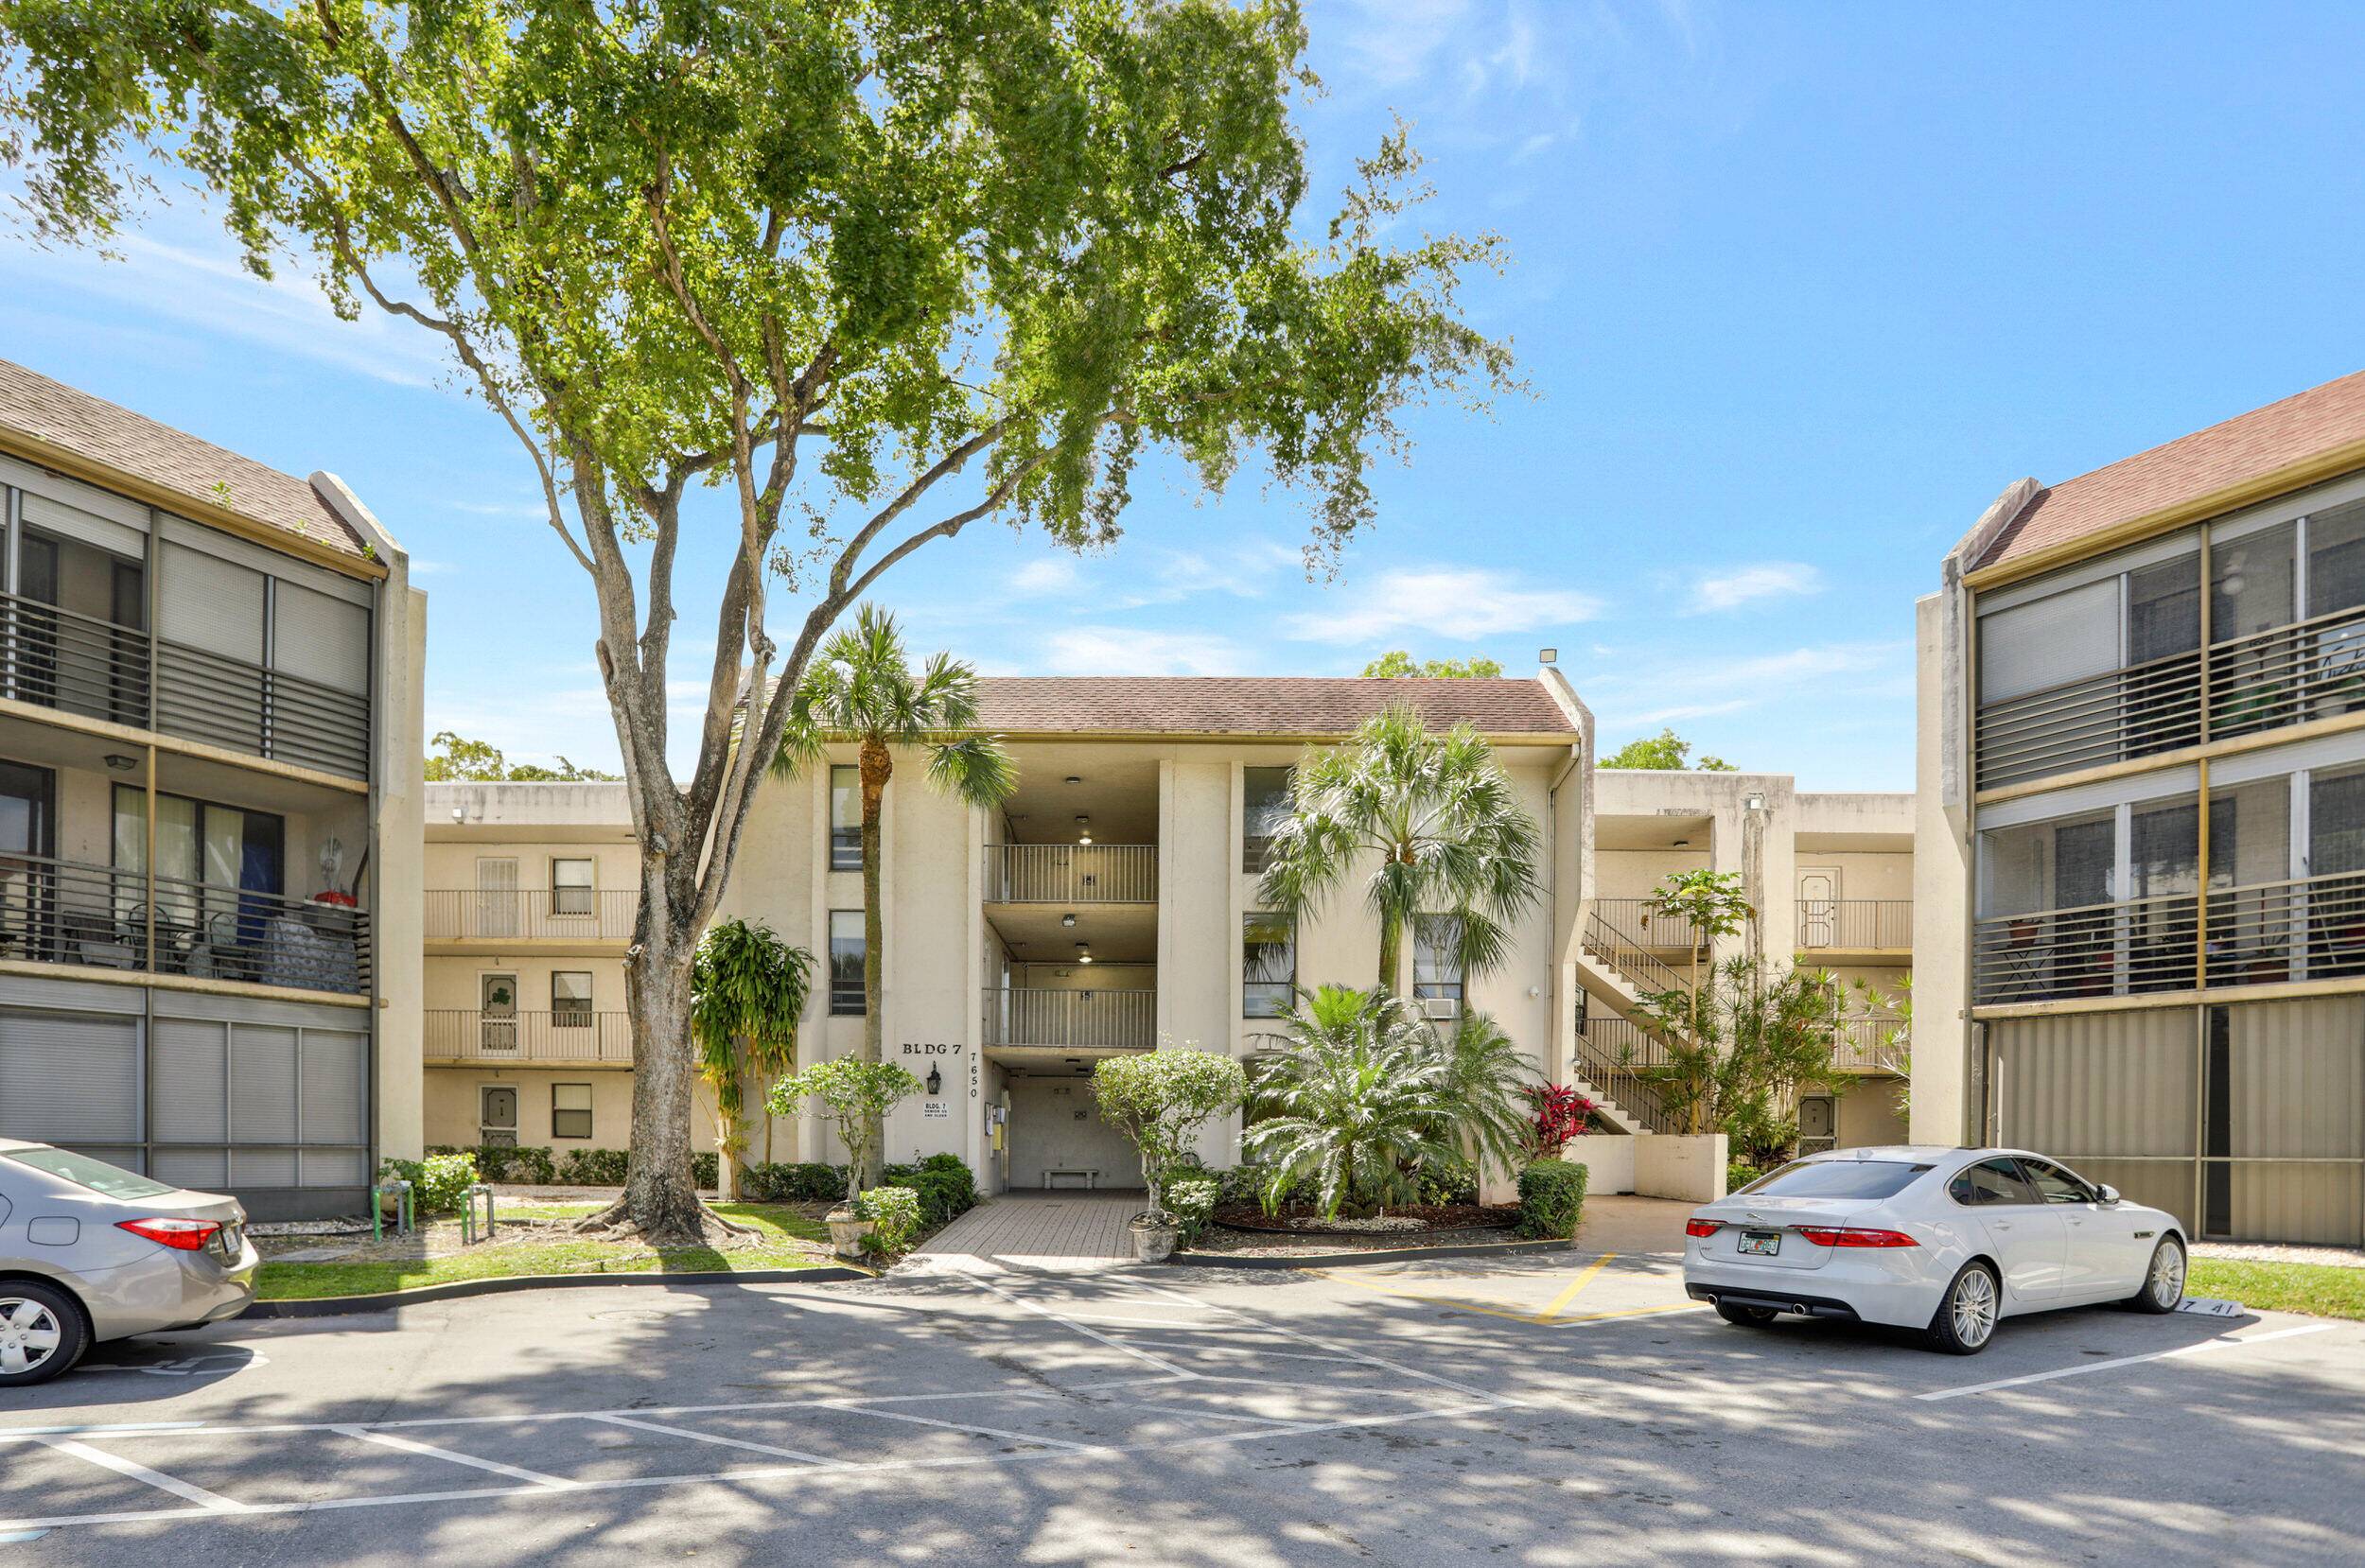 This unit is priced to sell, make this 3rd floor unit home sweet home in this quiet 55 community located in central Tamarac and close to all major stores and ...